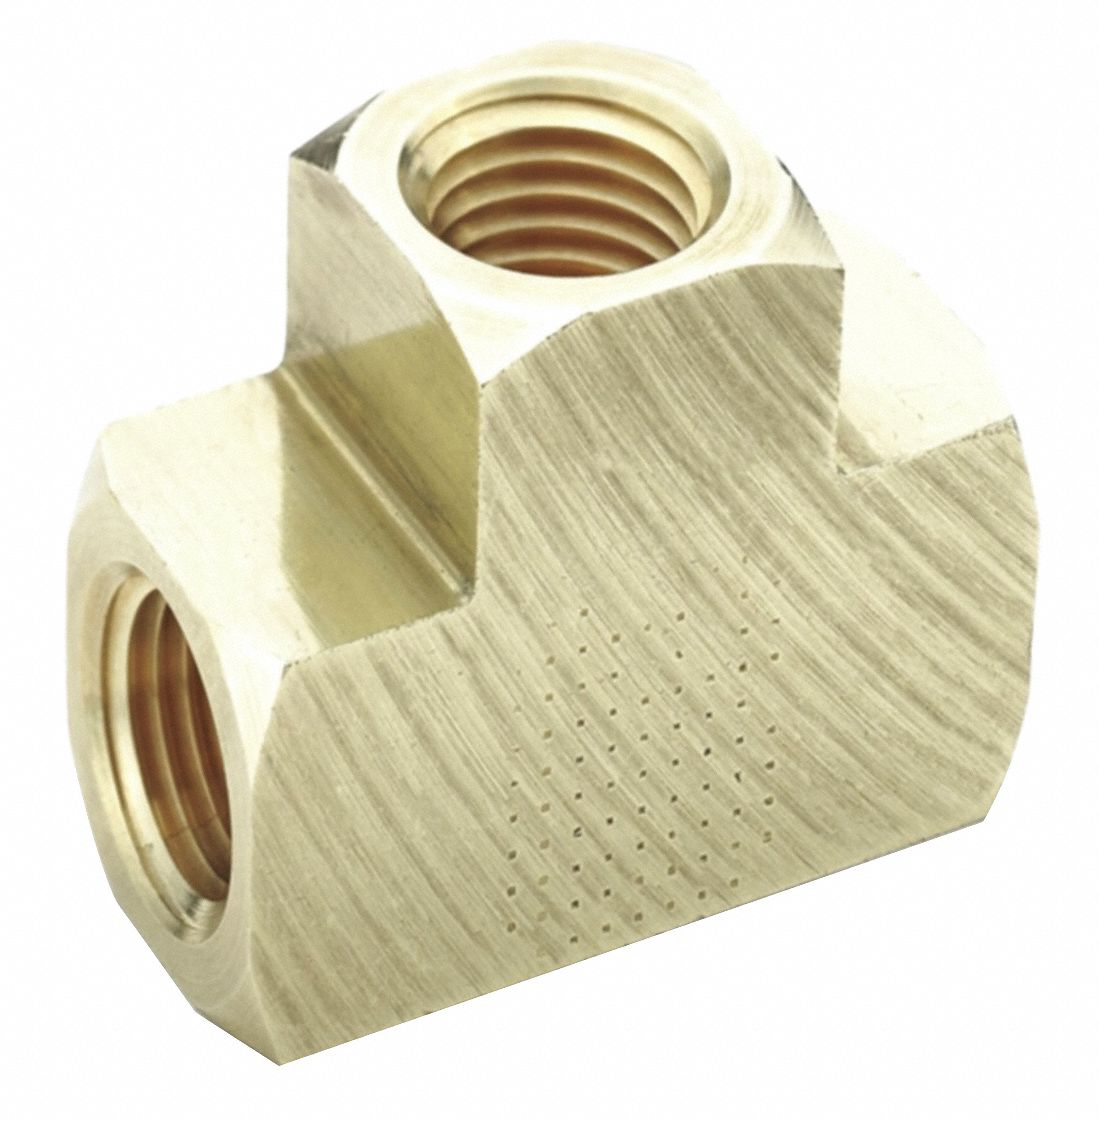 Brass, 1/8 in x 1/8 in Fitting Pipe Size, Adapter - 6AYX2